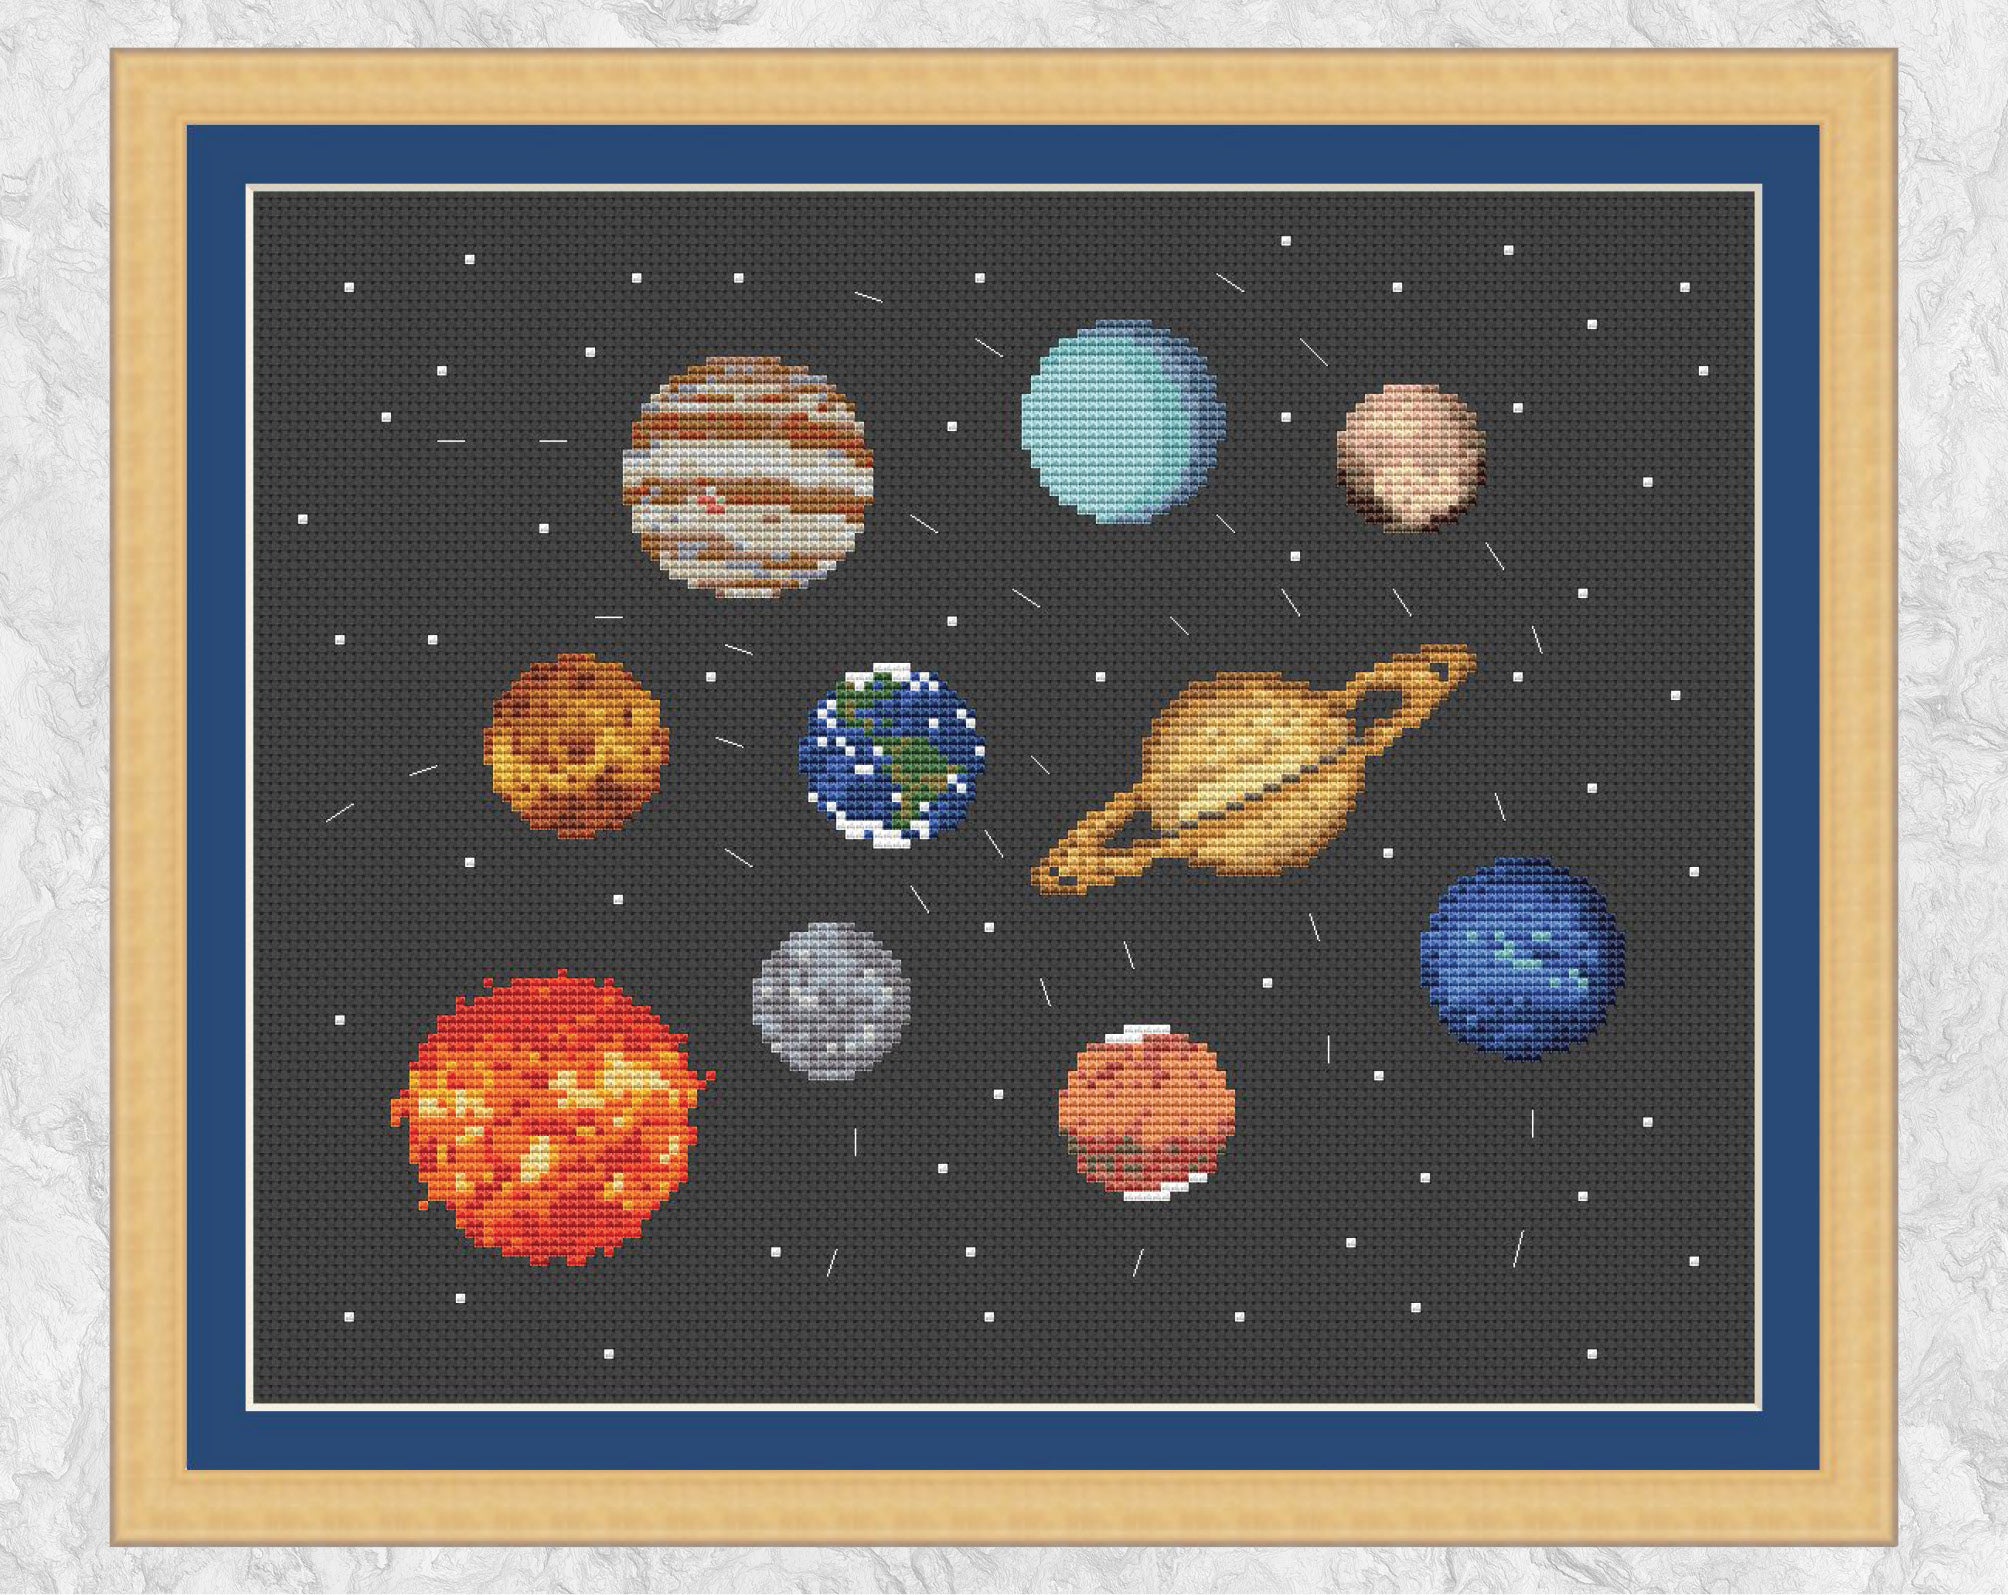 Cross stitch pattern of all the planets in the Solar System, along with the Sun and Pluto. Dashed lines indicate the orbits of the planets (not to scale). The planets are accurately designed from NASA images as much as possible given the limitations of size. Shown with frame.